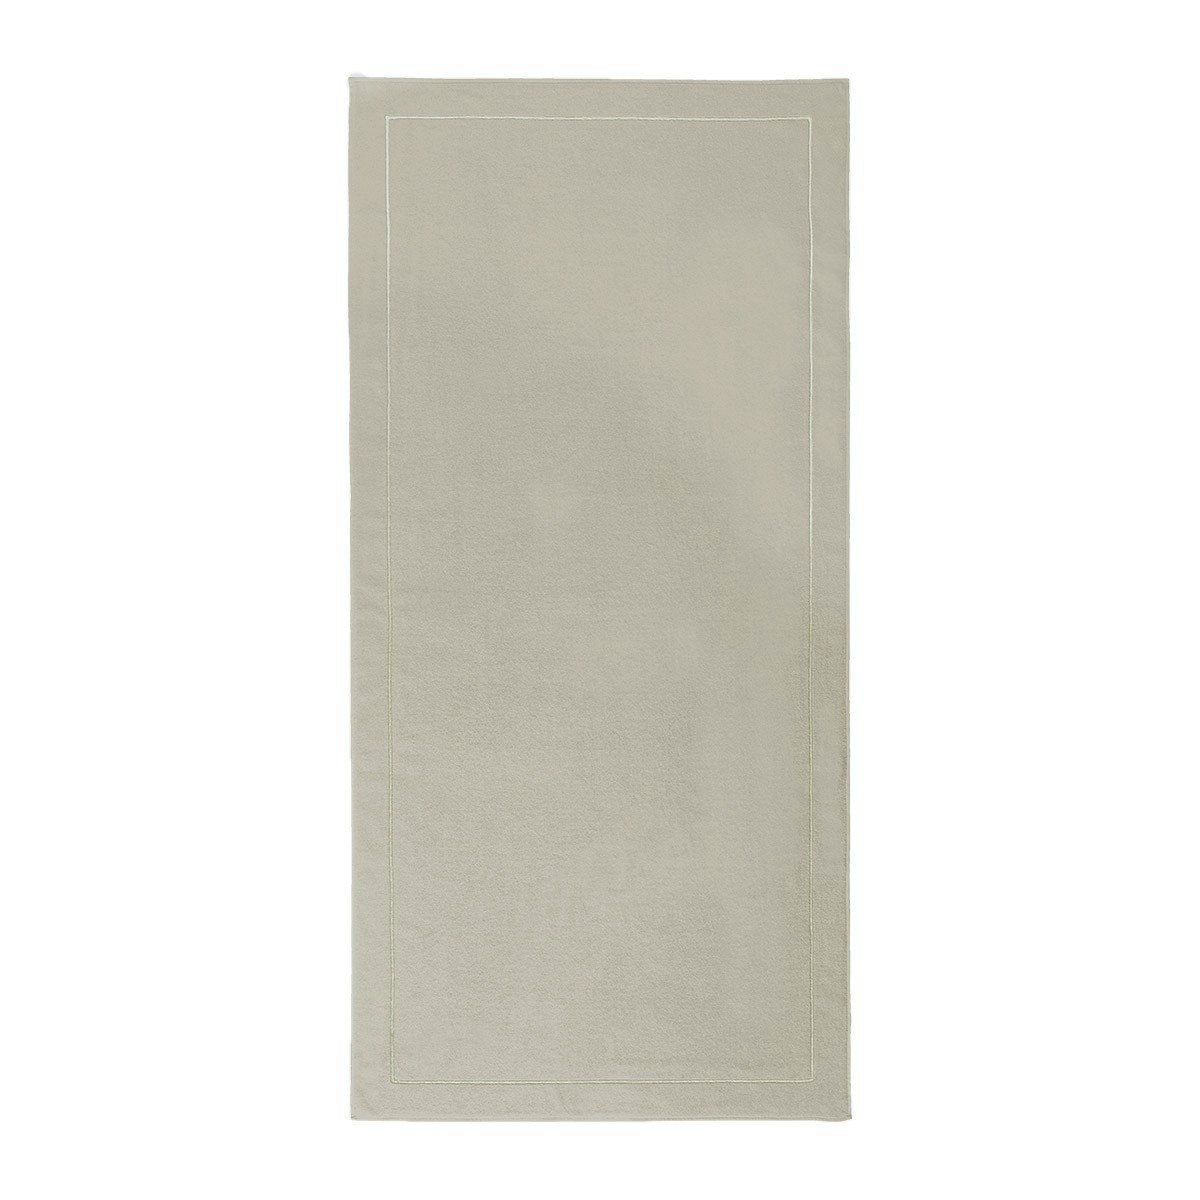 Croisiere Pierre Stone gray Beach Towel by Yves Delorme Fig Linens